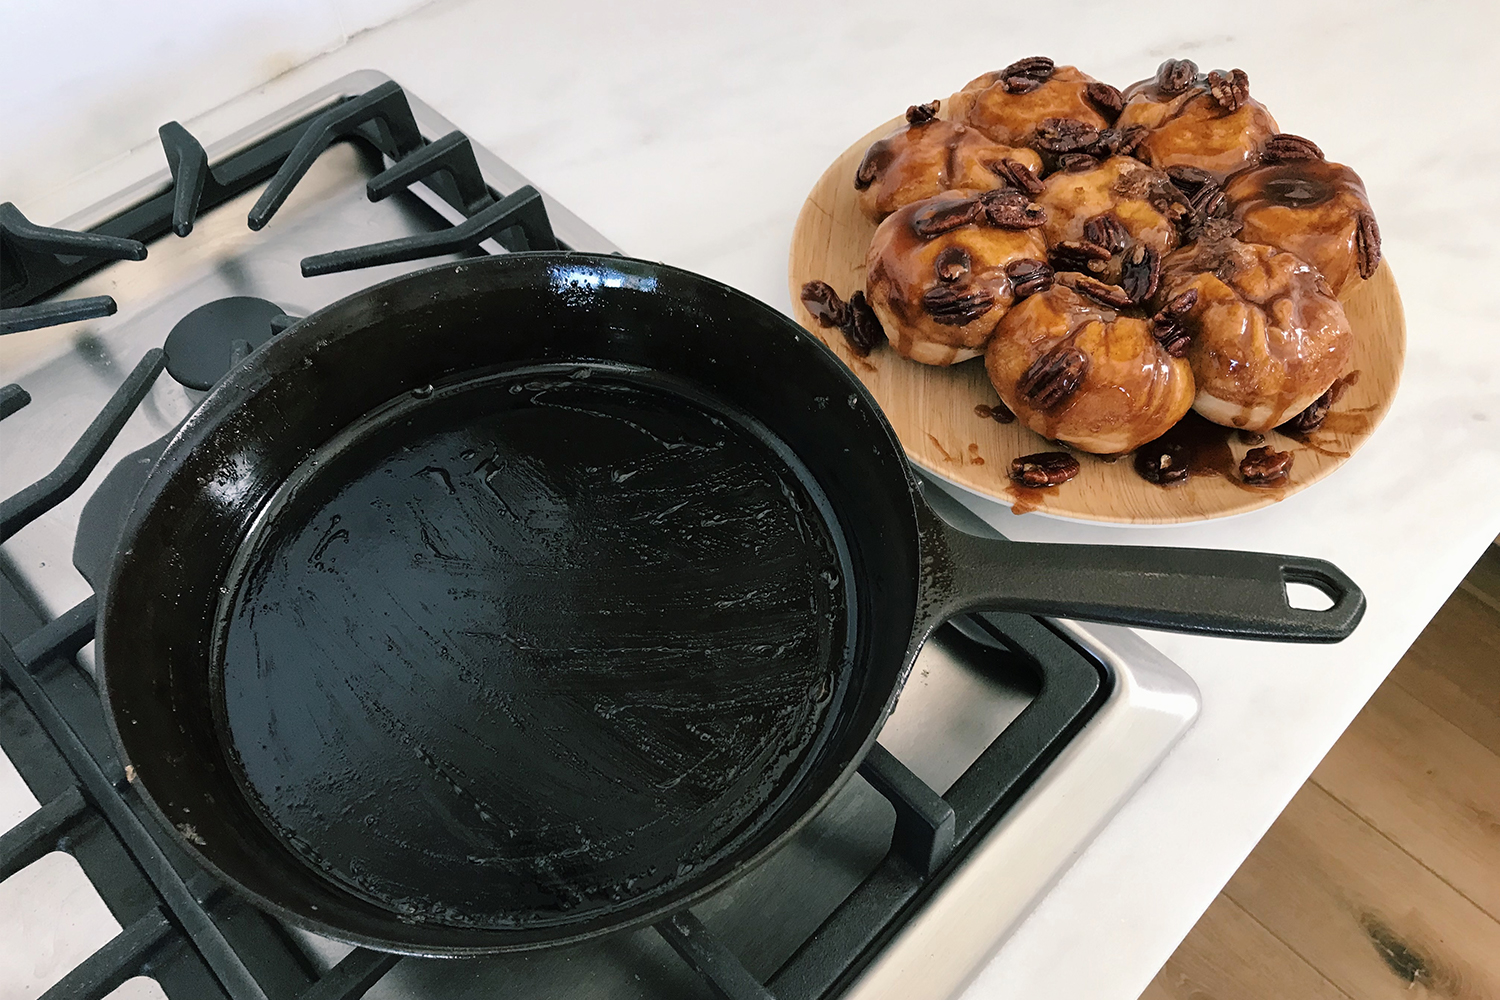 The Field Company No. 8 cast iron skillet sitting on a stovetop next to a plate of pecan sticky buns on a white countertop